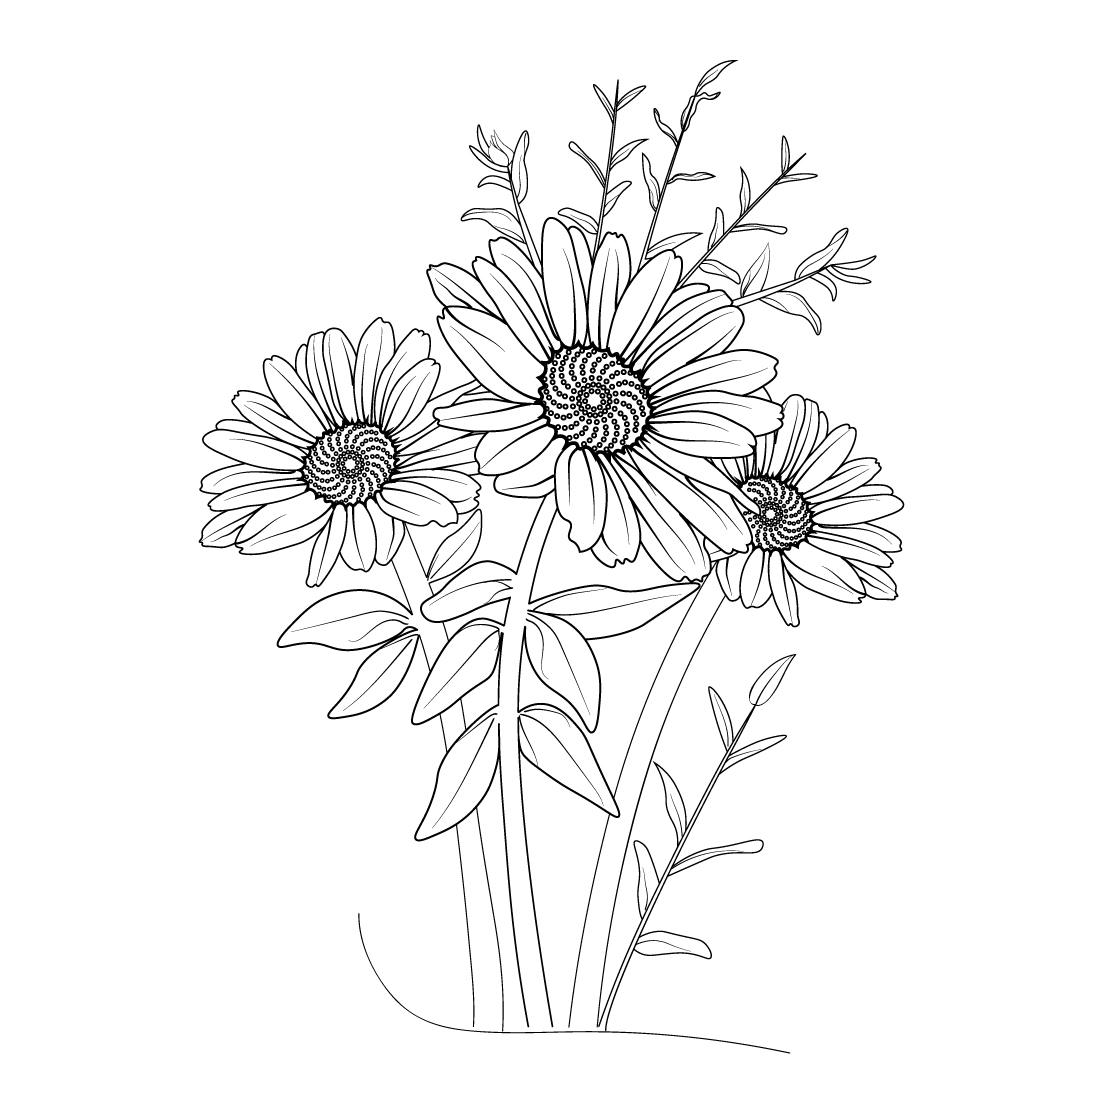 Pencil realistic daisy flower drawing simple daisy line drawing, daisy flower line drawing preview image.